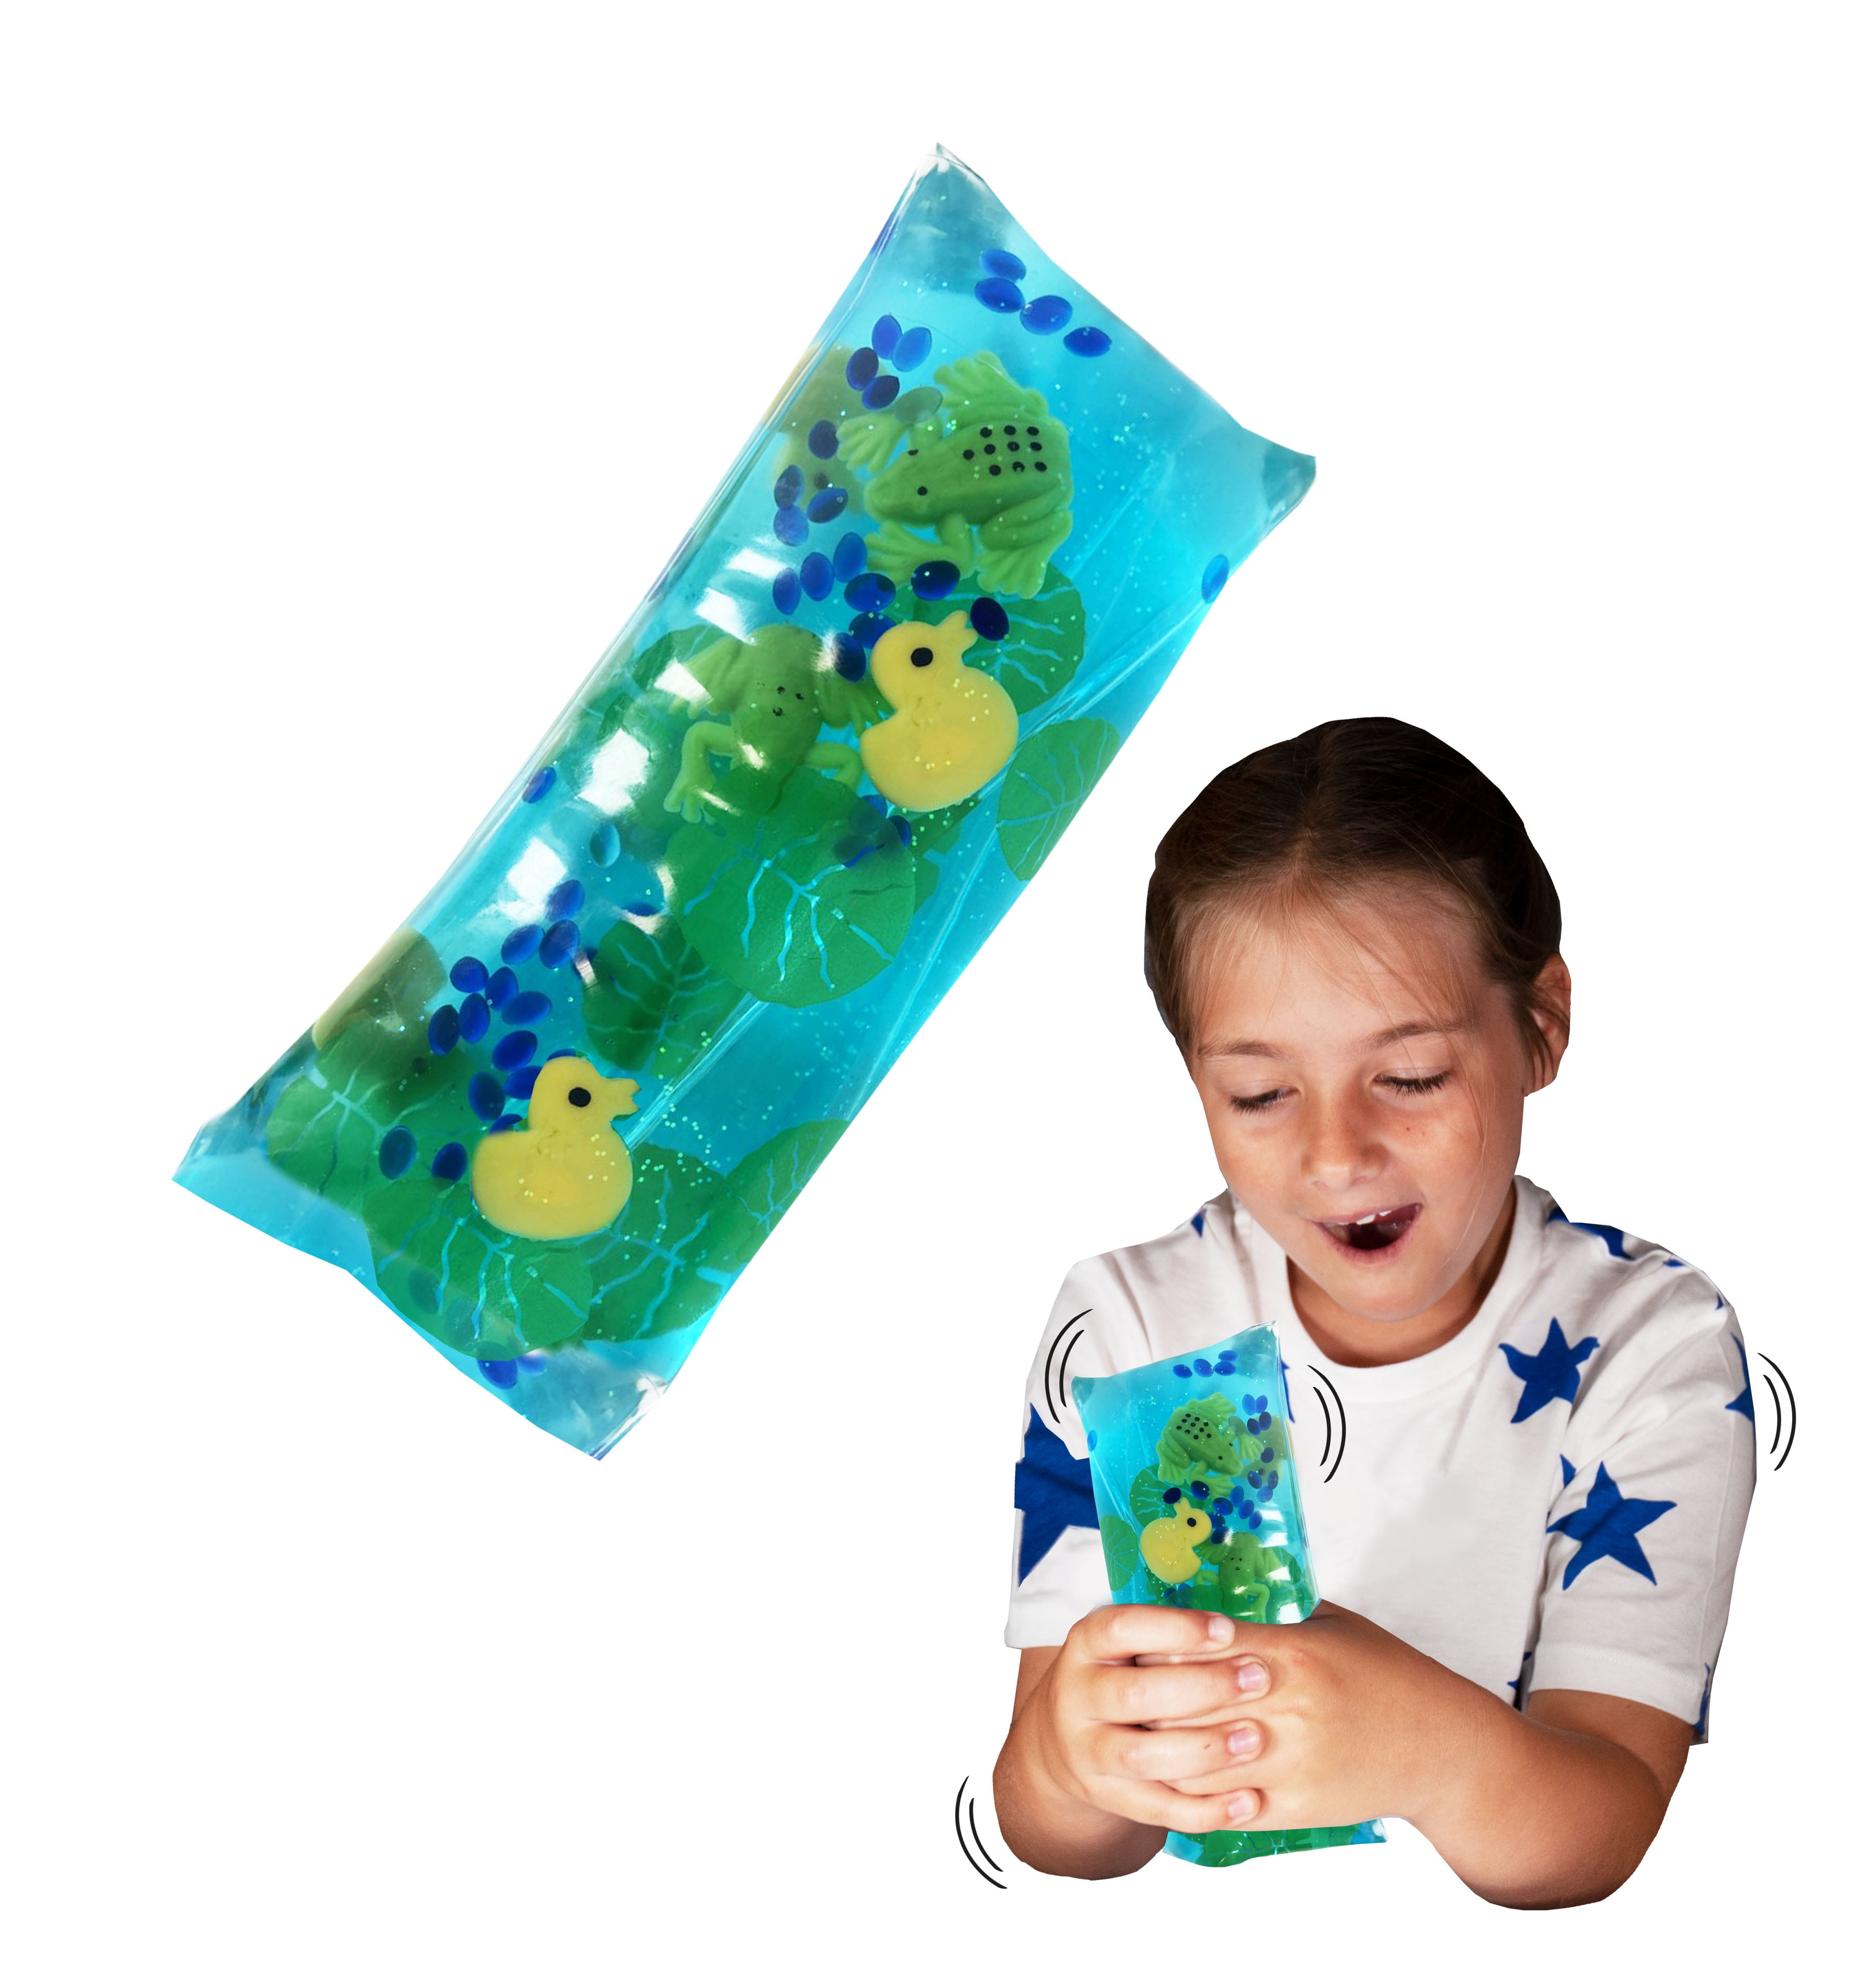 bøf Vend tilbage Spytte Wiggly Jiggly - Pond Life from Deluxebase. Large super squishy water snake  fidget toy with duck and frog figures. Great sensory toy for autism and  ADHD - Walmart.com